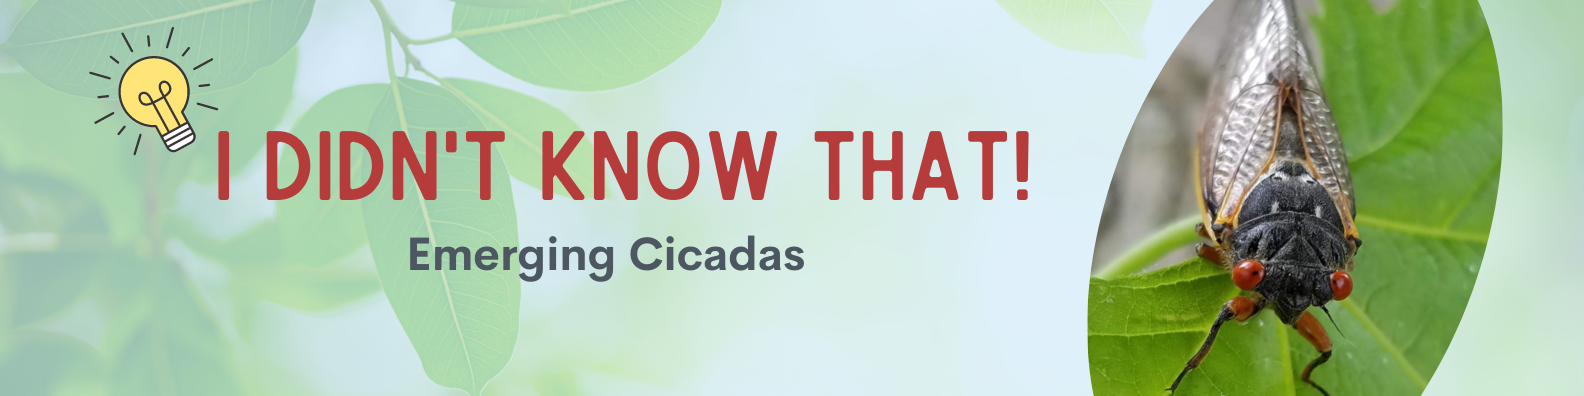 Article banner for I Didn't Know That: Emerging Cicadas with image of a cicada